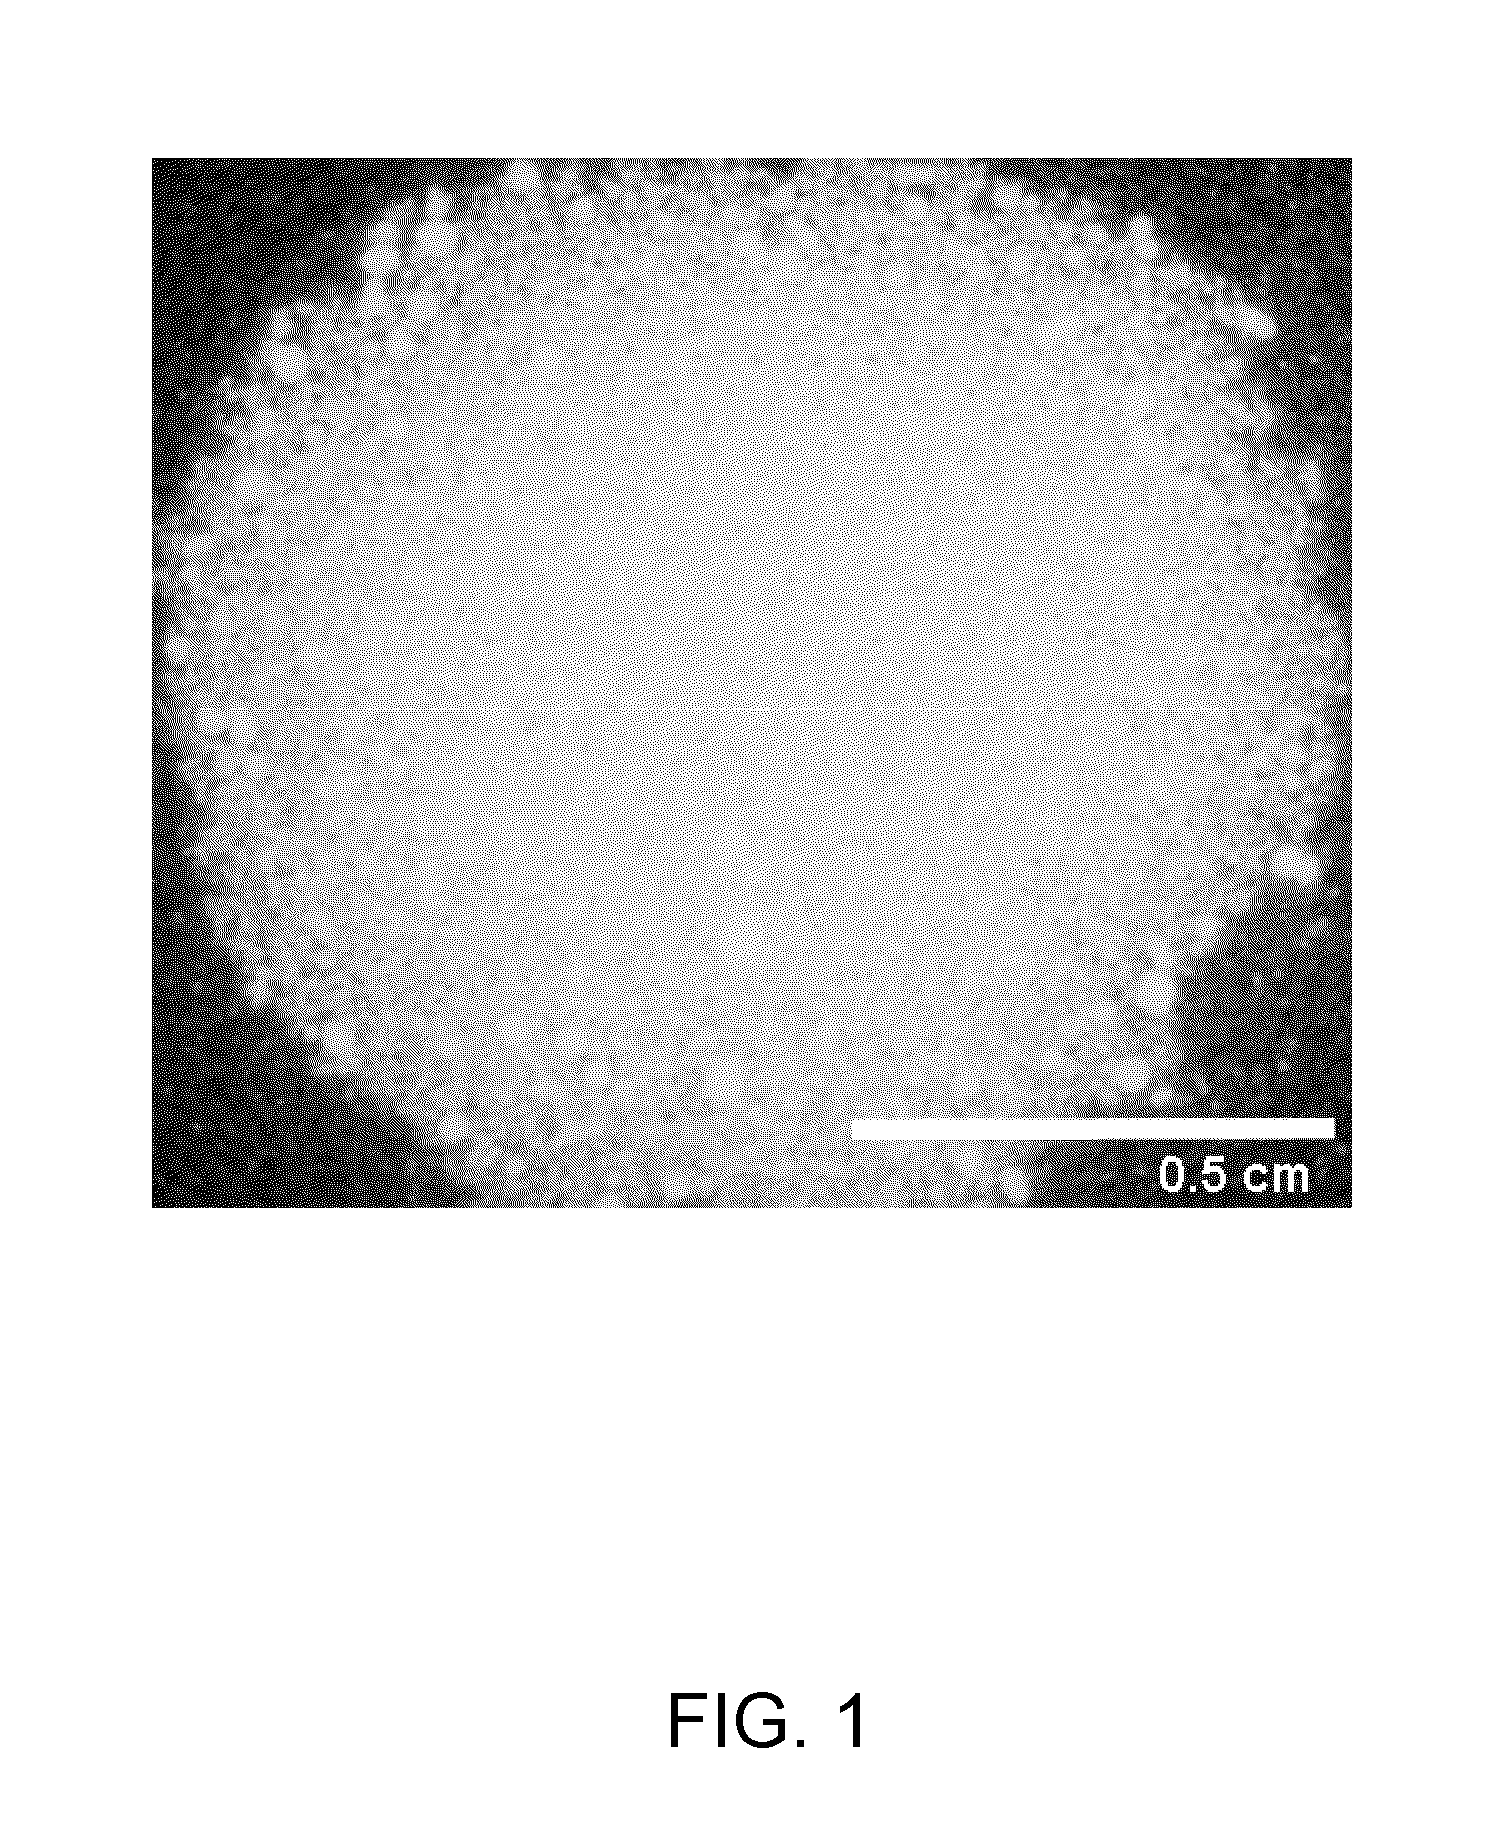 Cell compositions derived from dedifferentiated reprogrammed cells